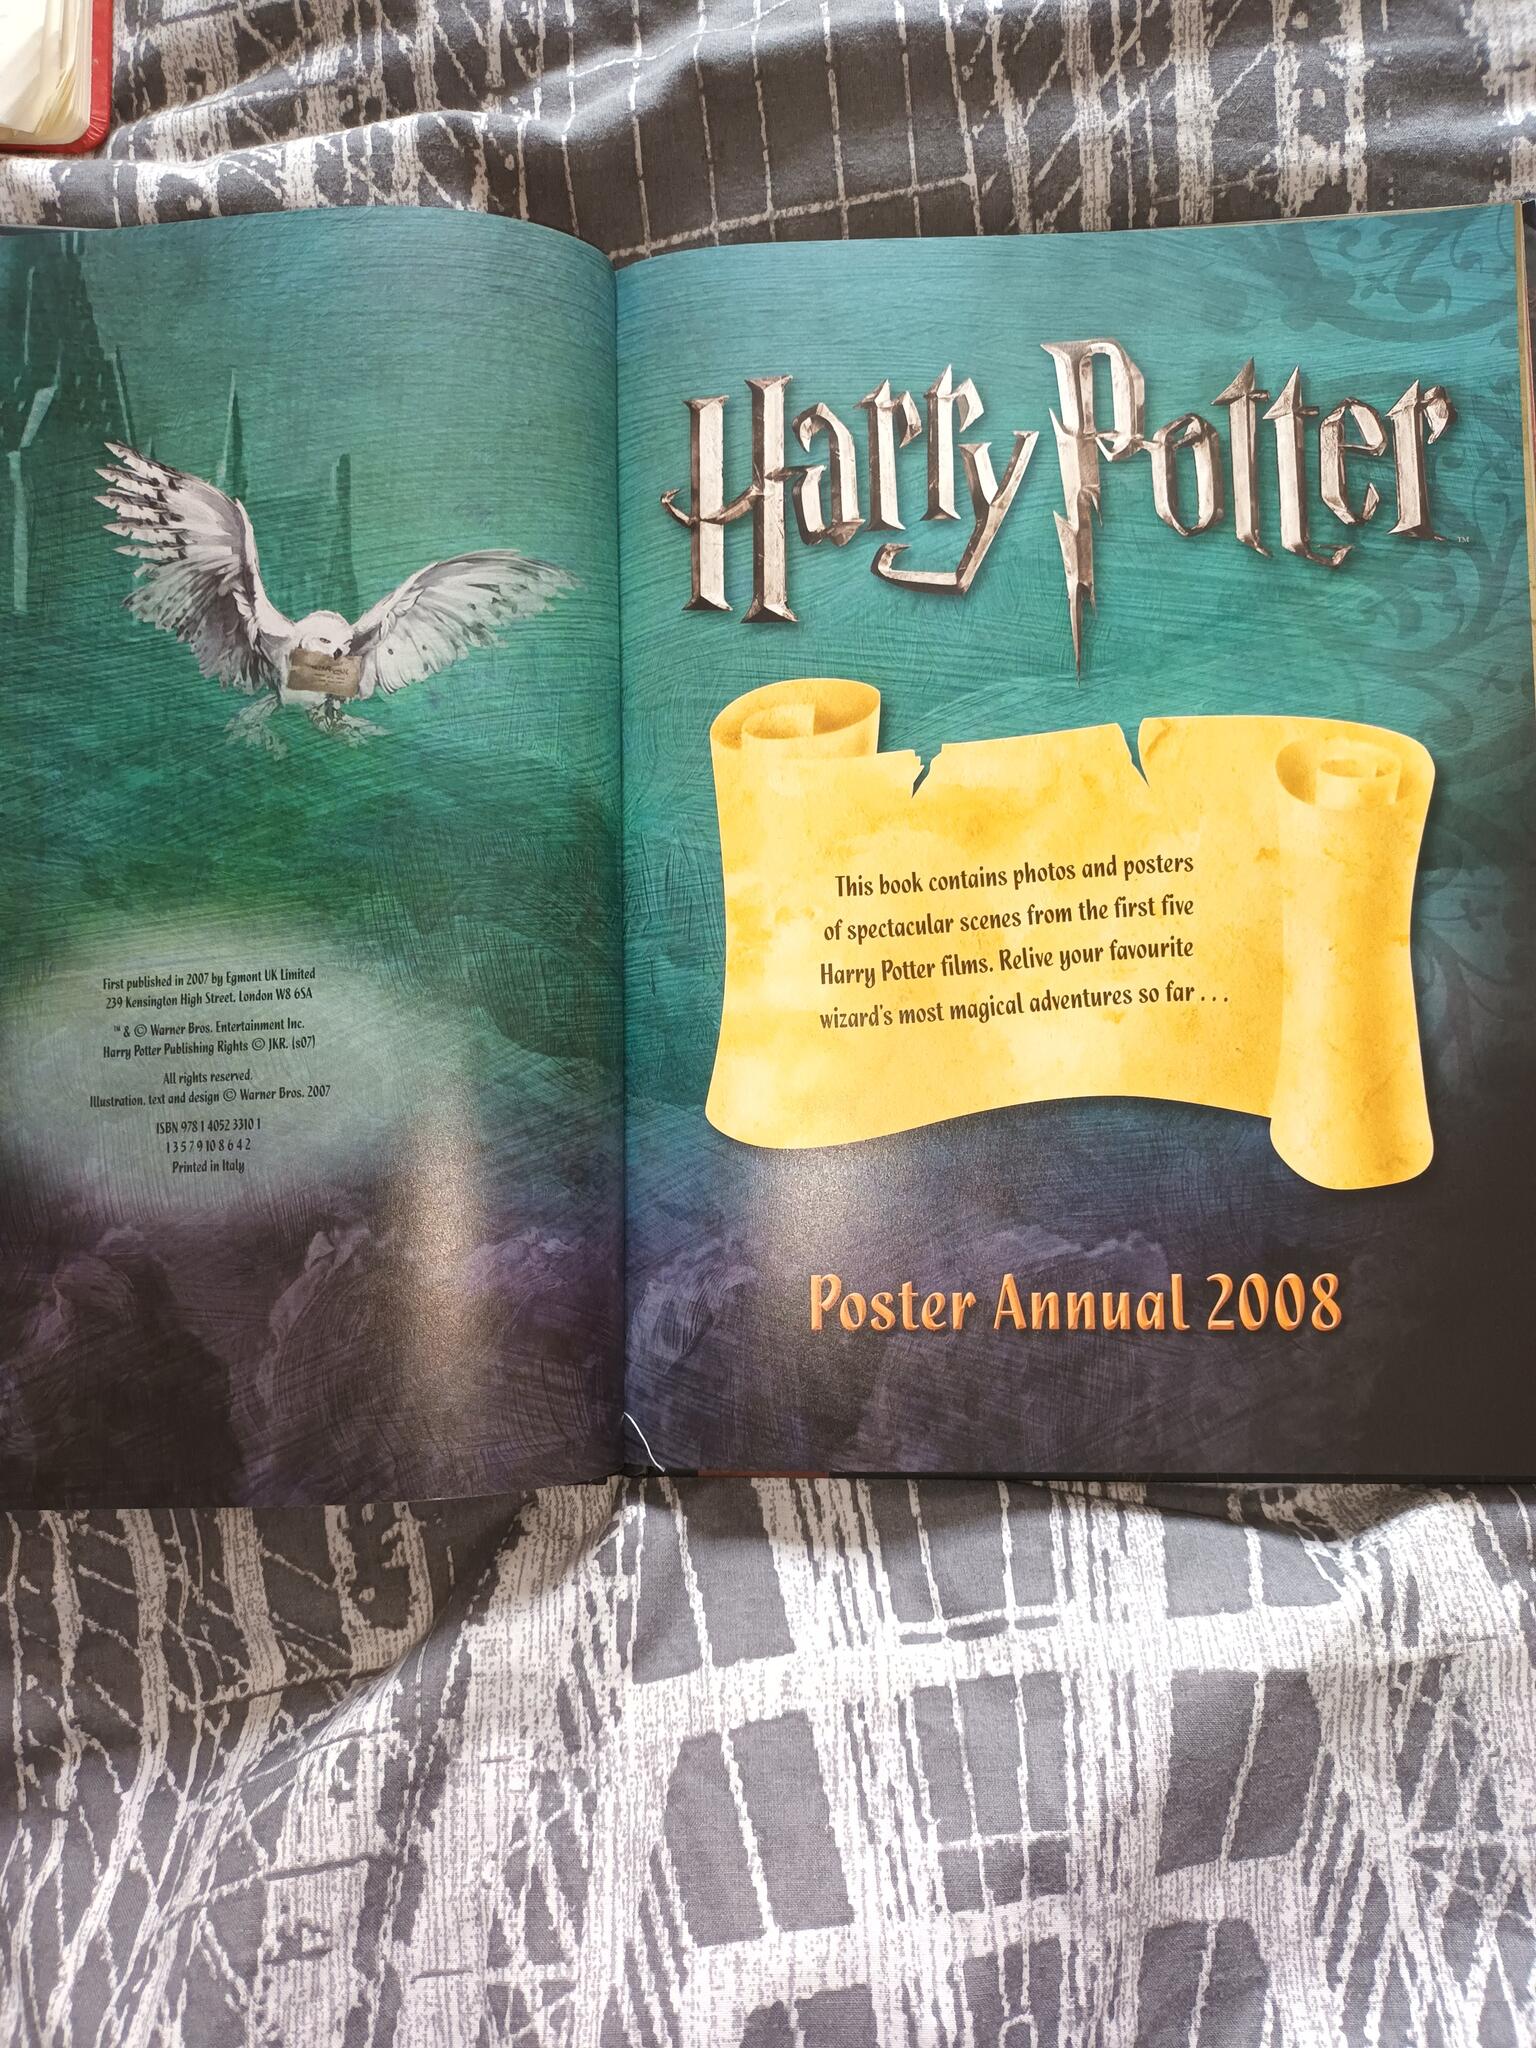 Harry Potter 2008 Poster Annual For £20 In Reading, Engl